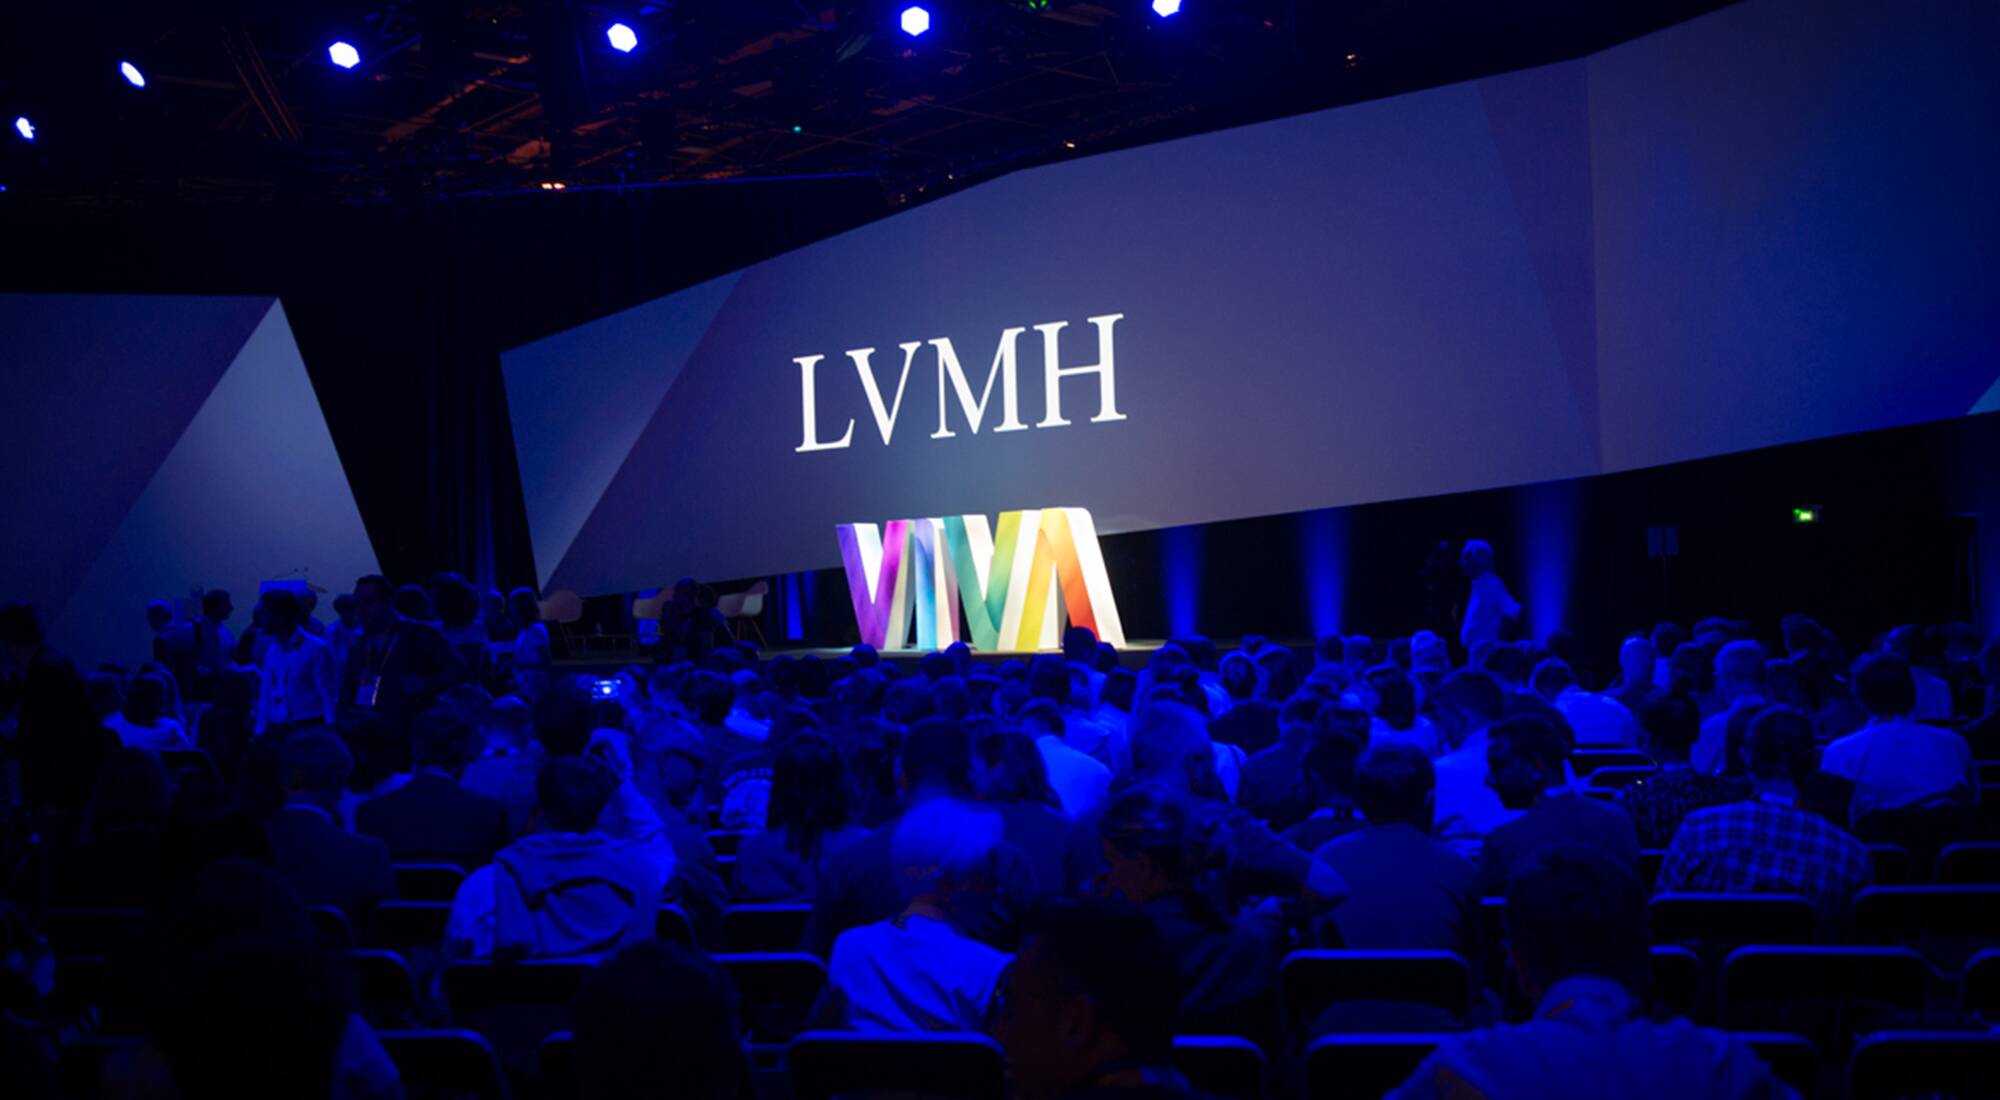 LVMH's Print Acquisitions to Benefit Ad Spend, Publishing Sector